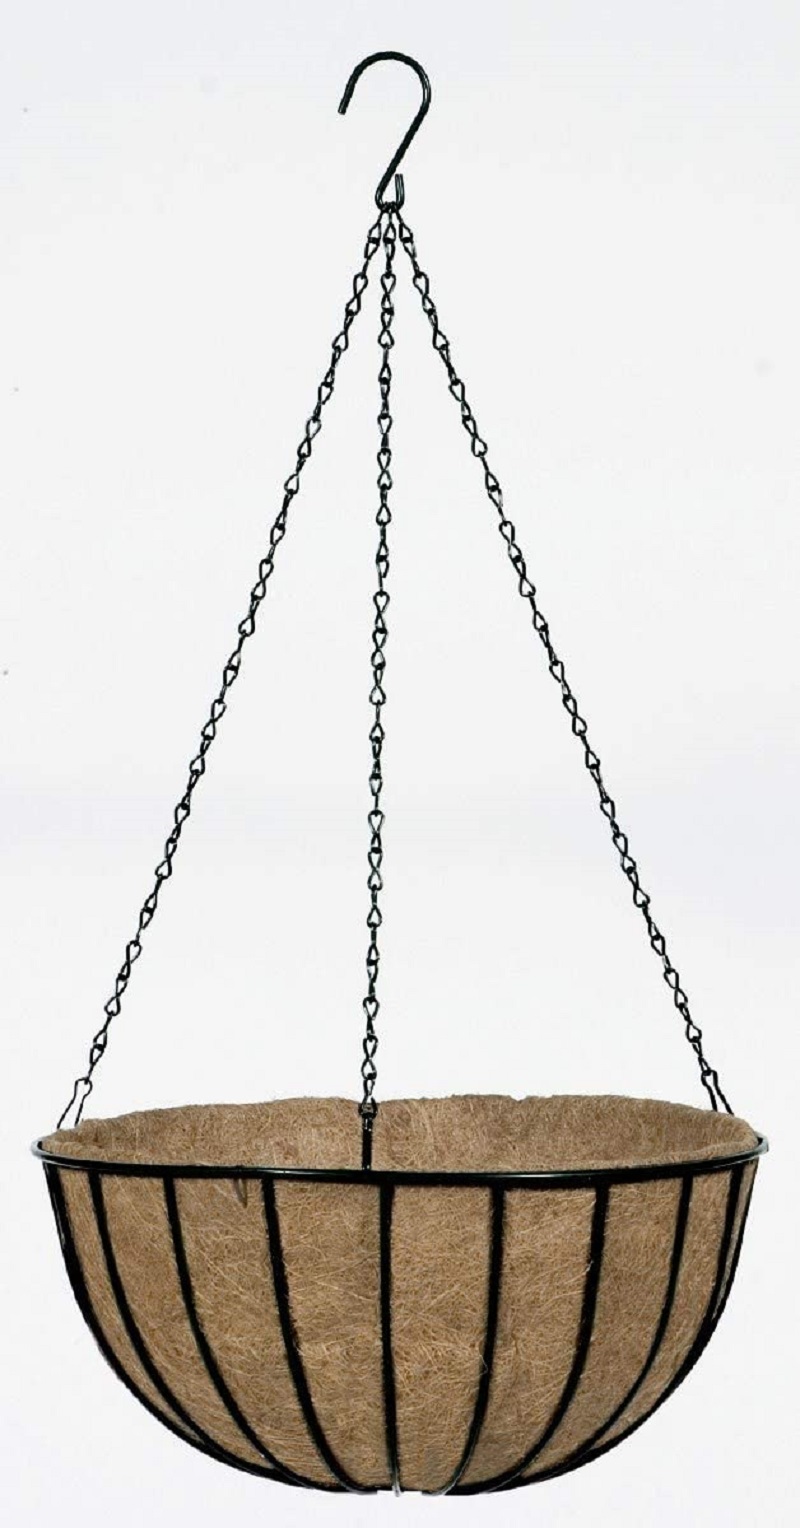 Gardman R408 14 Inch Traditional Coco Lined Hanging Basket